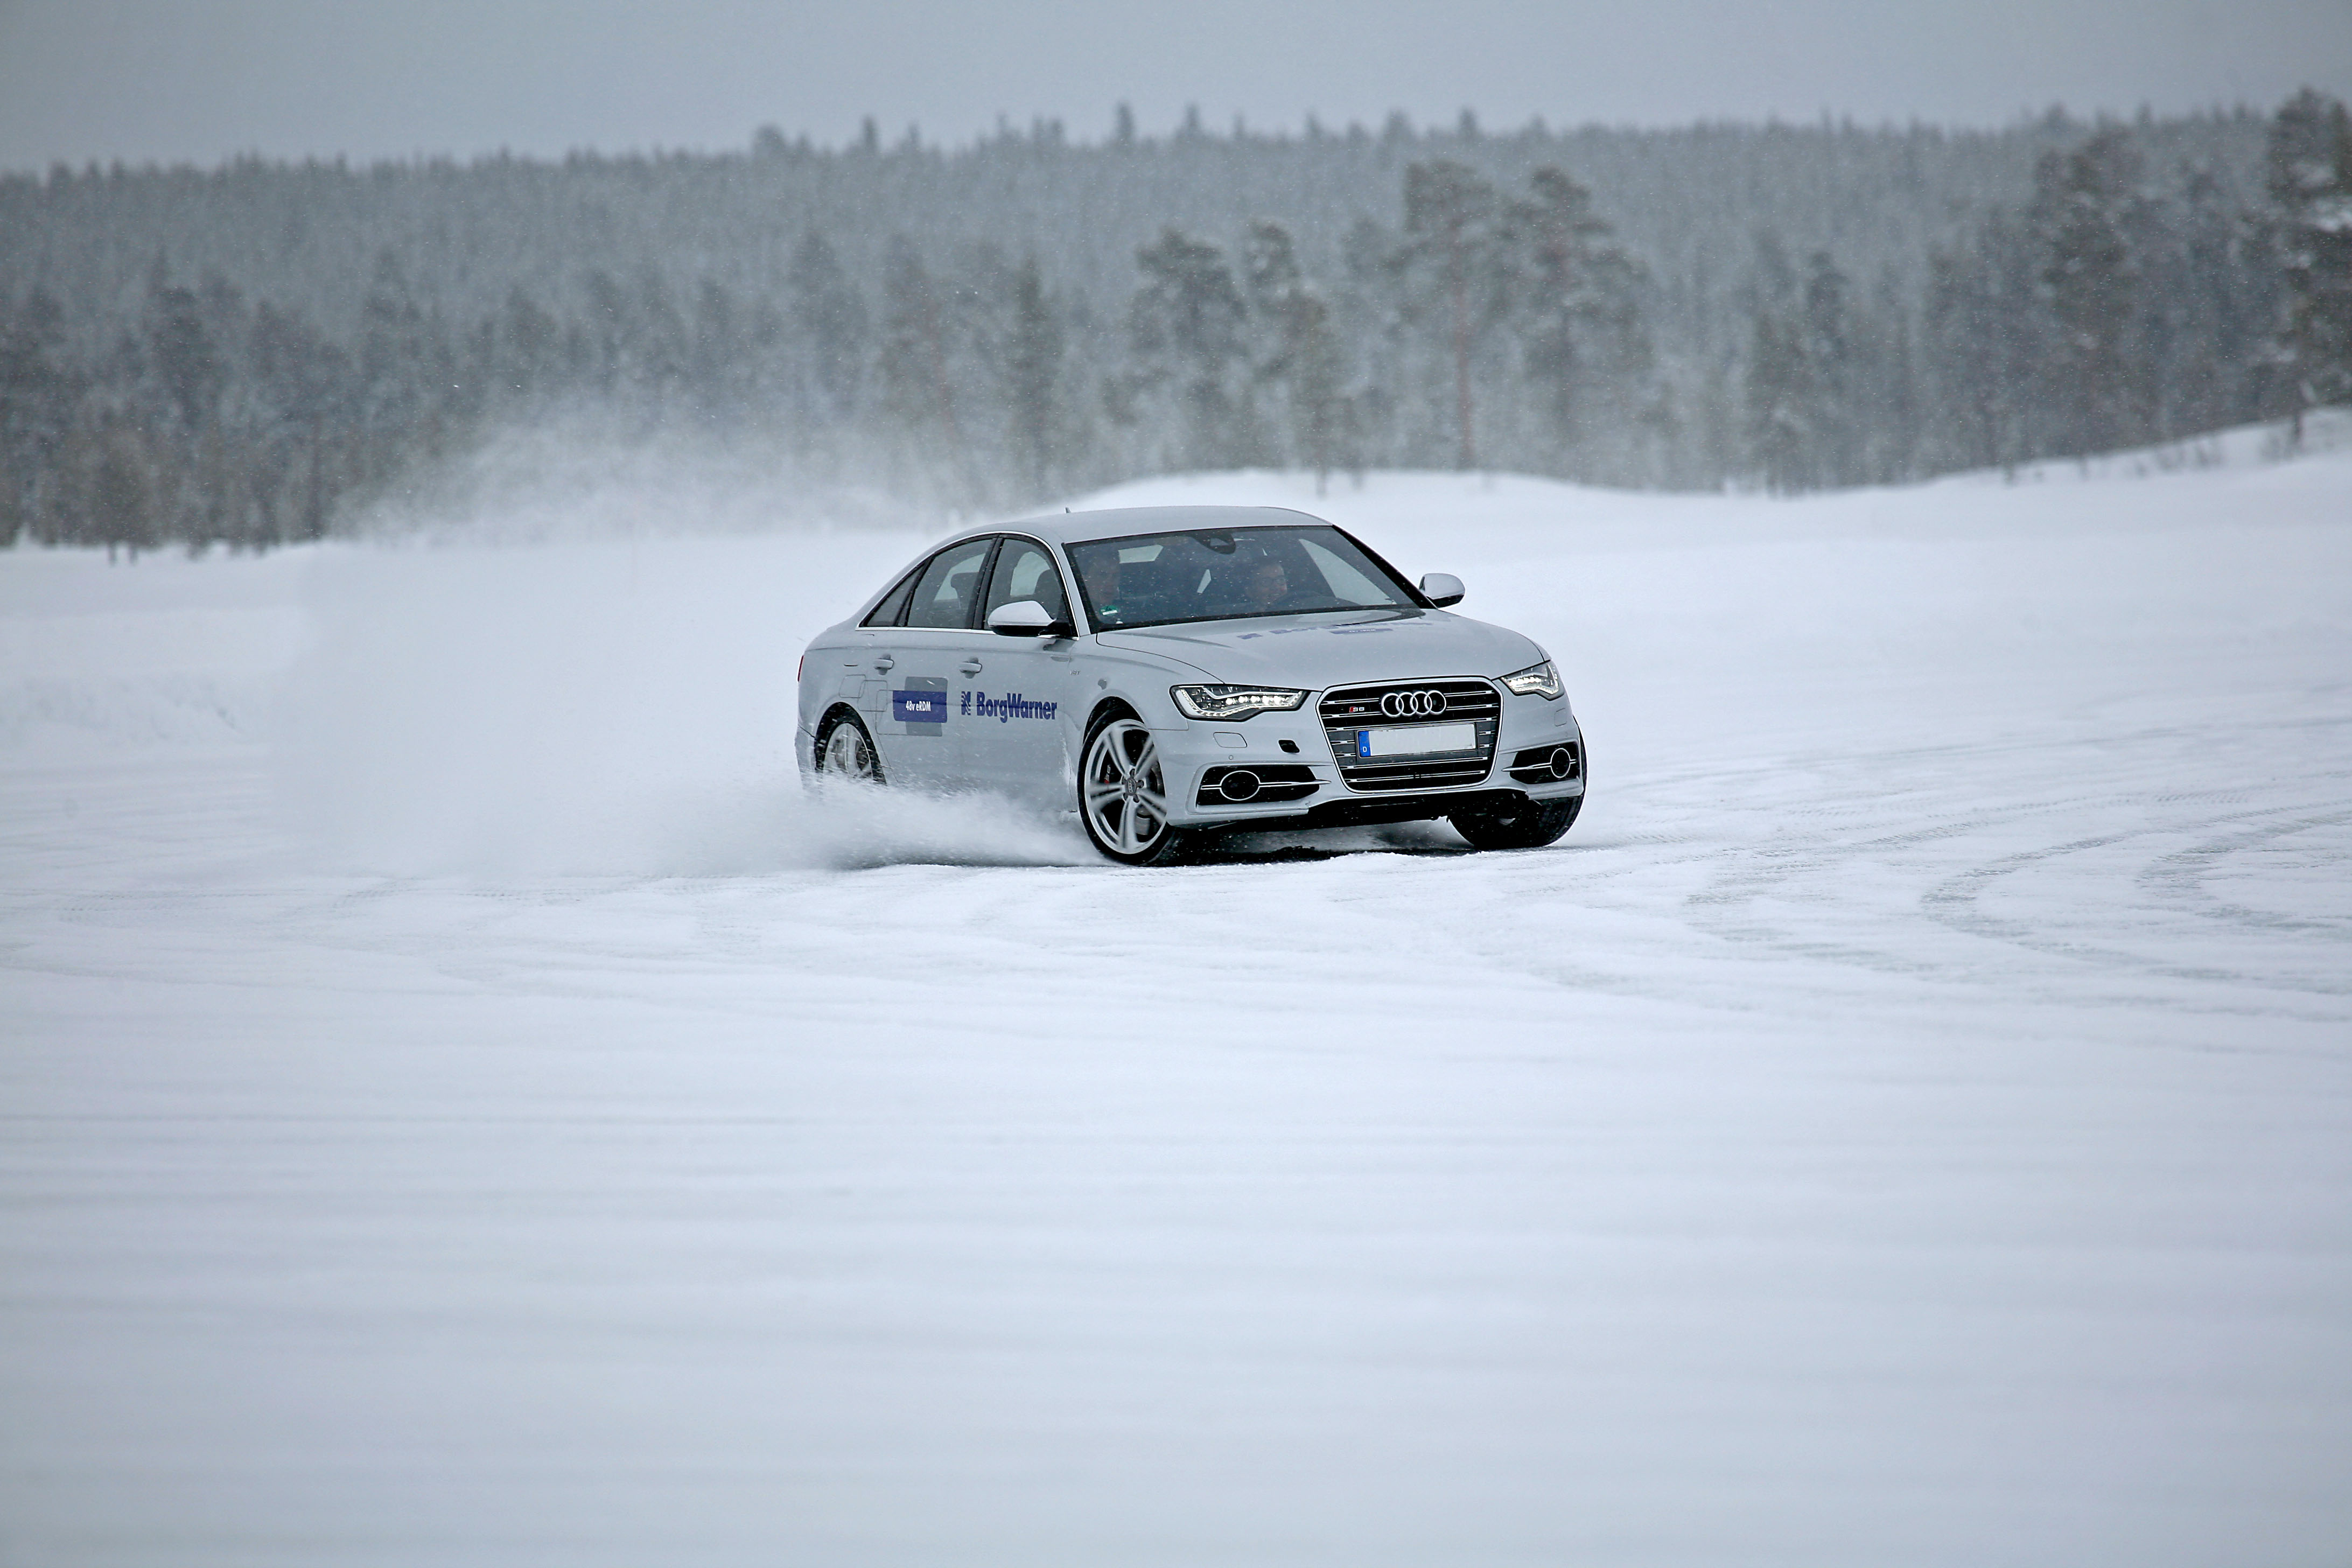 BorgWarner Propulsion Technologies Conquer the Arctic in Winter Tests